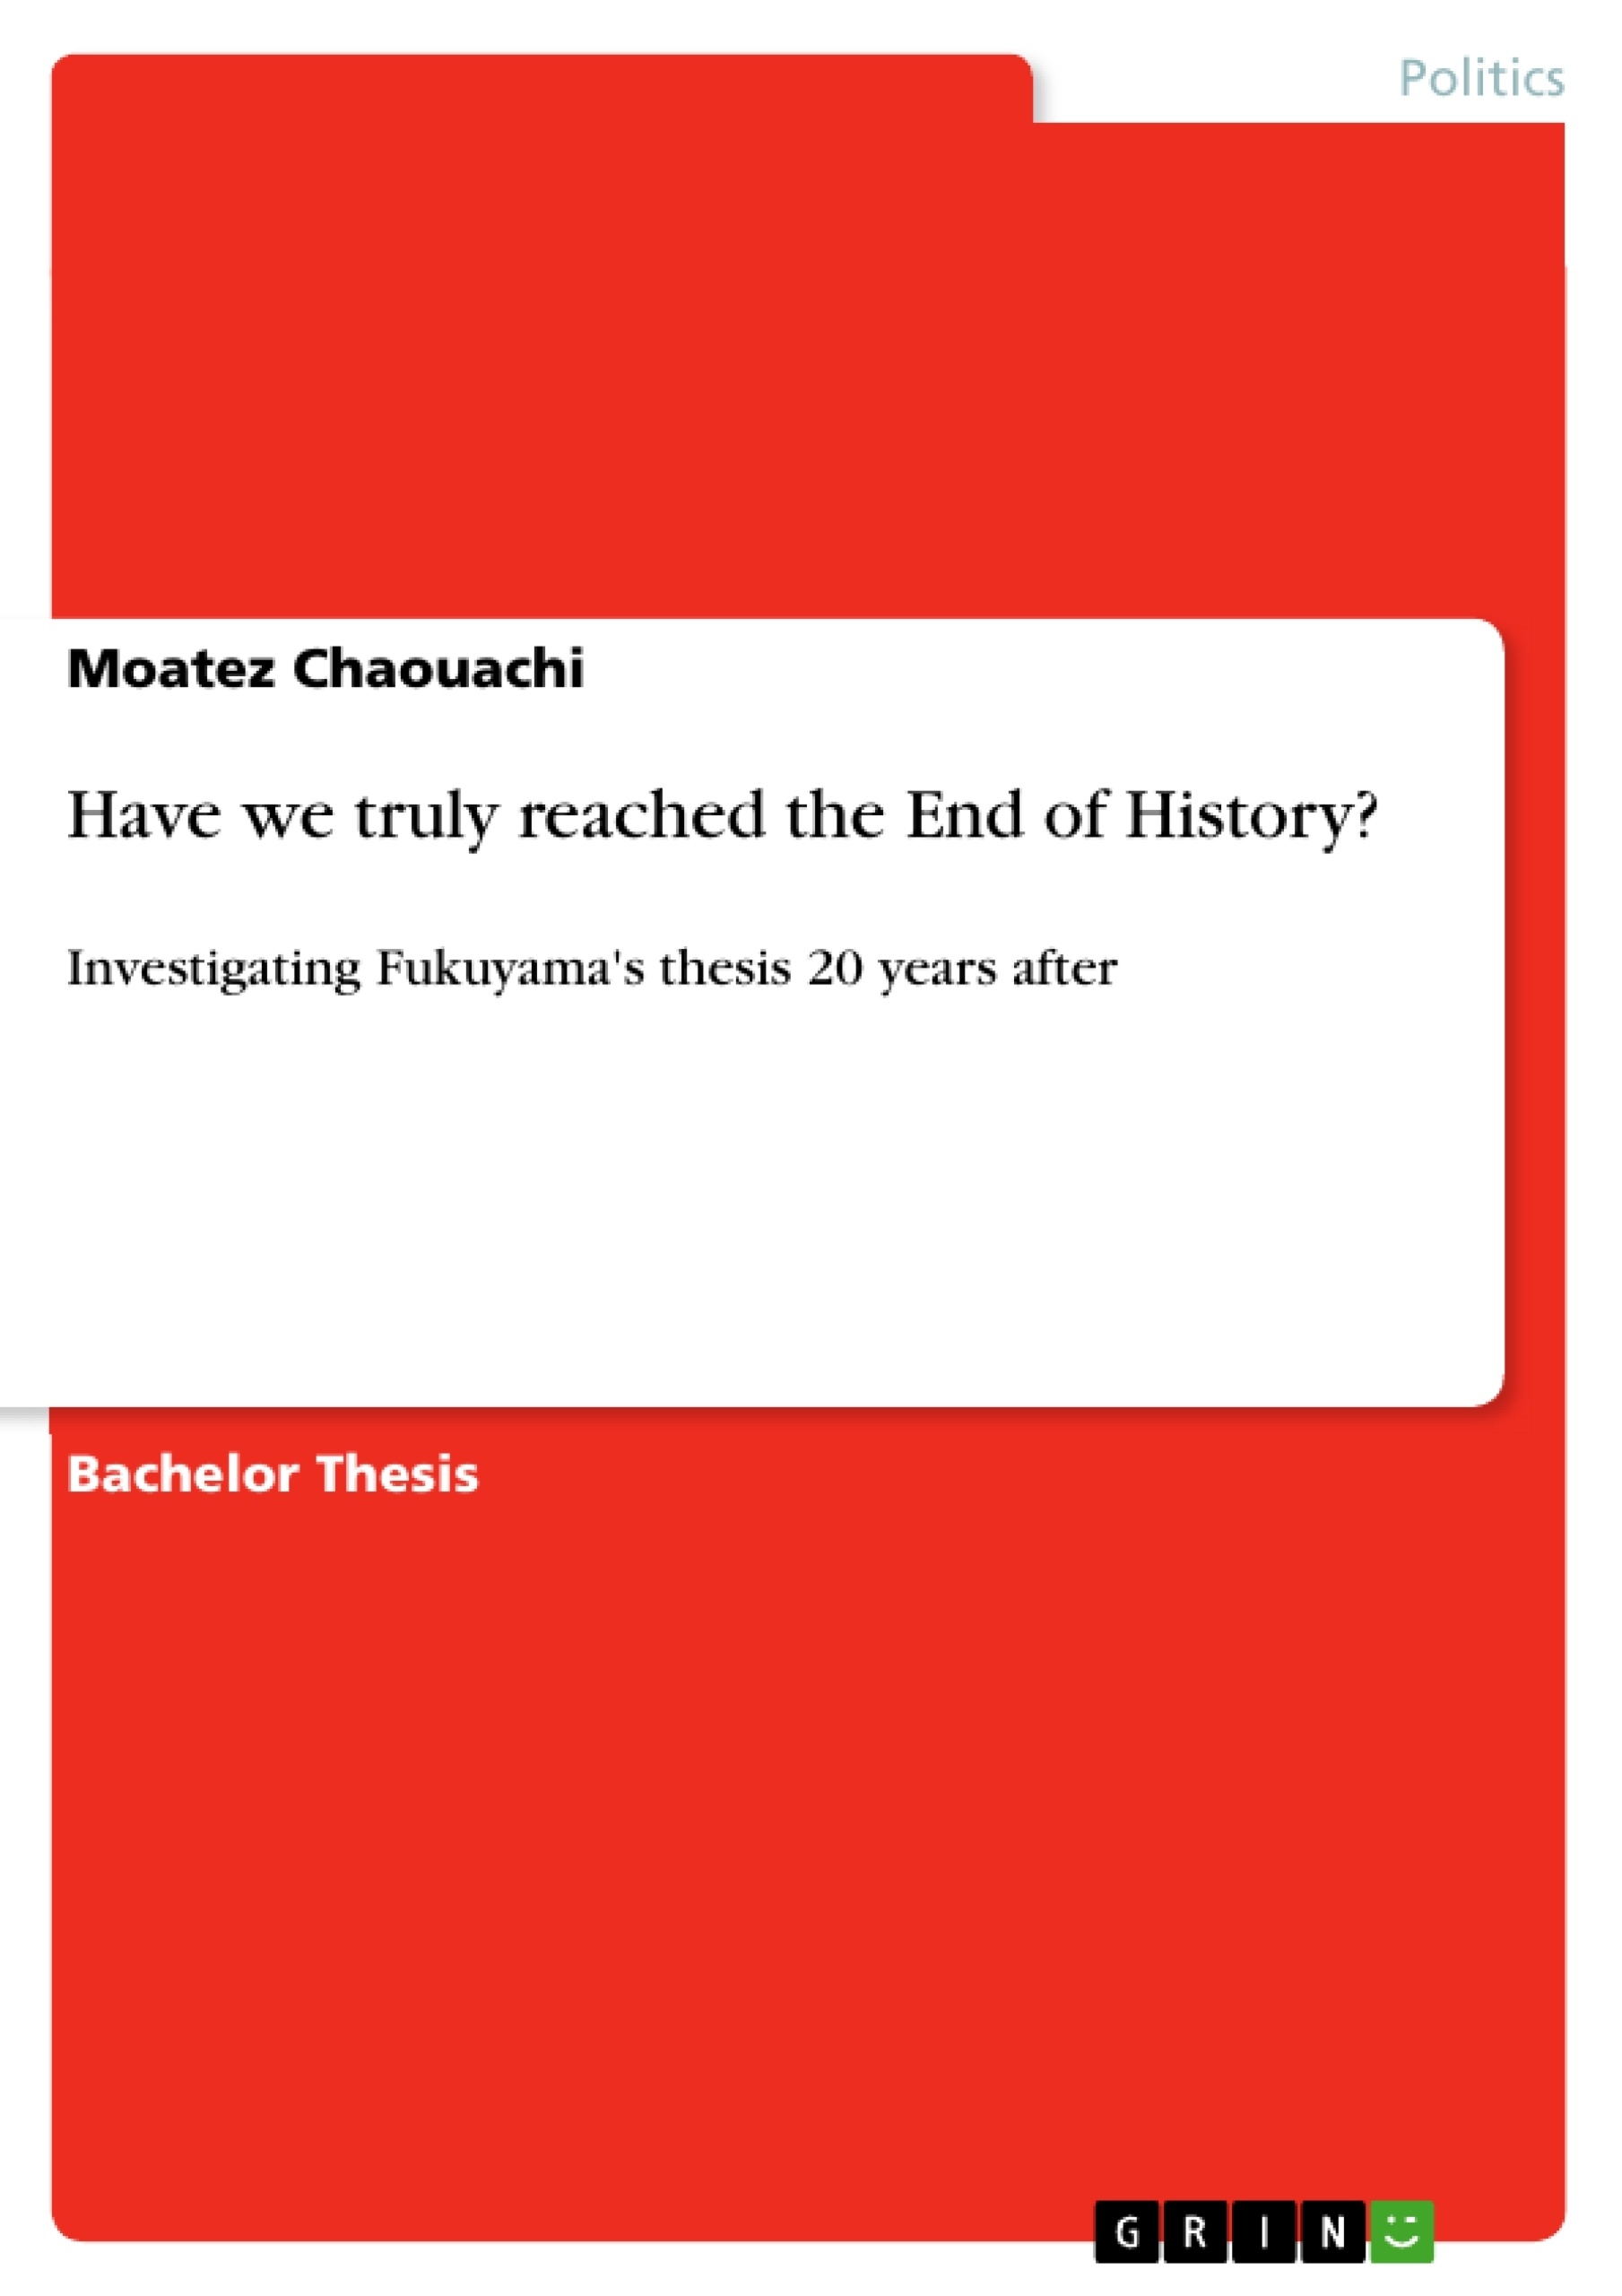 Title: Have we truly reached the End of History?